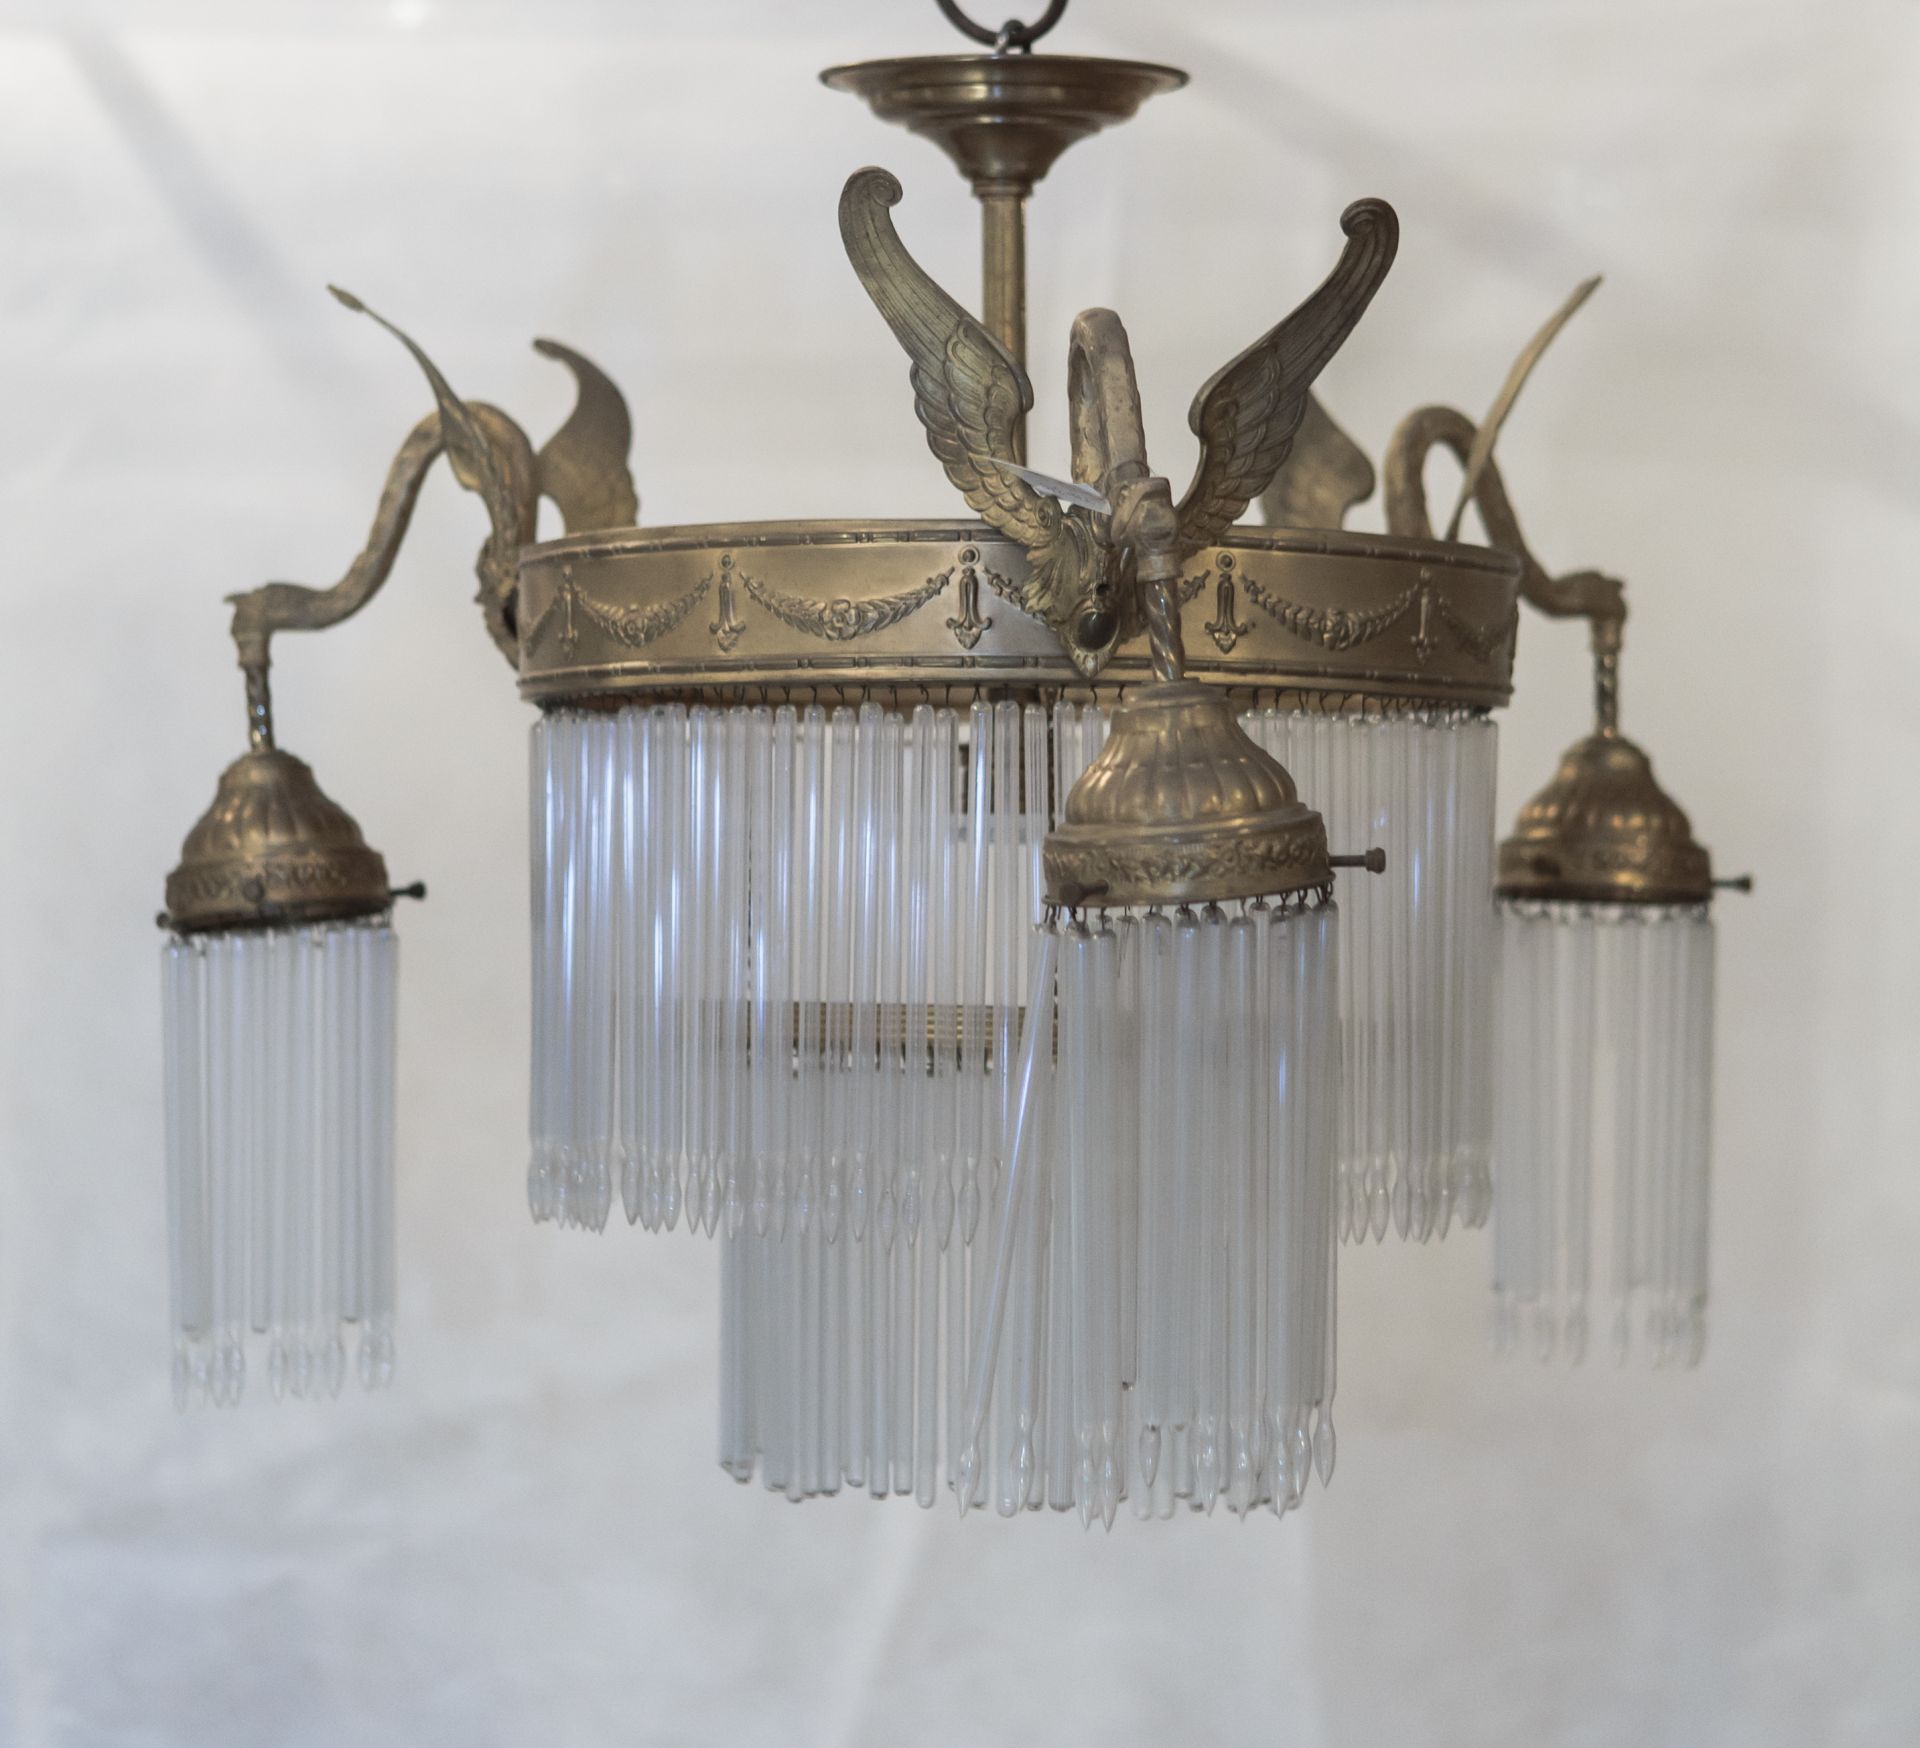 Chandelier, 1900–1911, Lithuanian National Museum of Art, TM-316. Photo by Tomas Kapočius, 2017